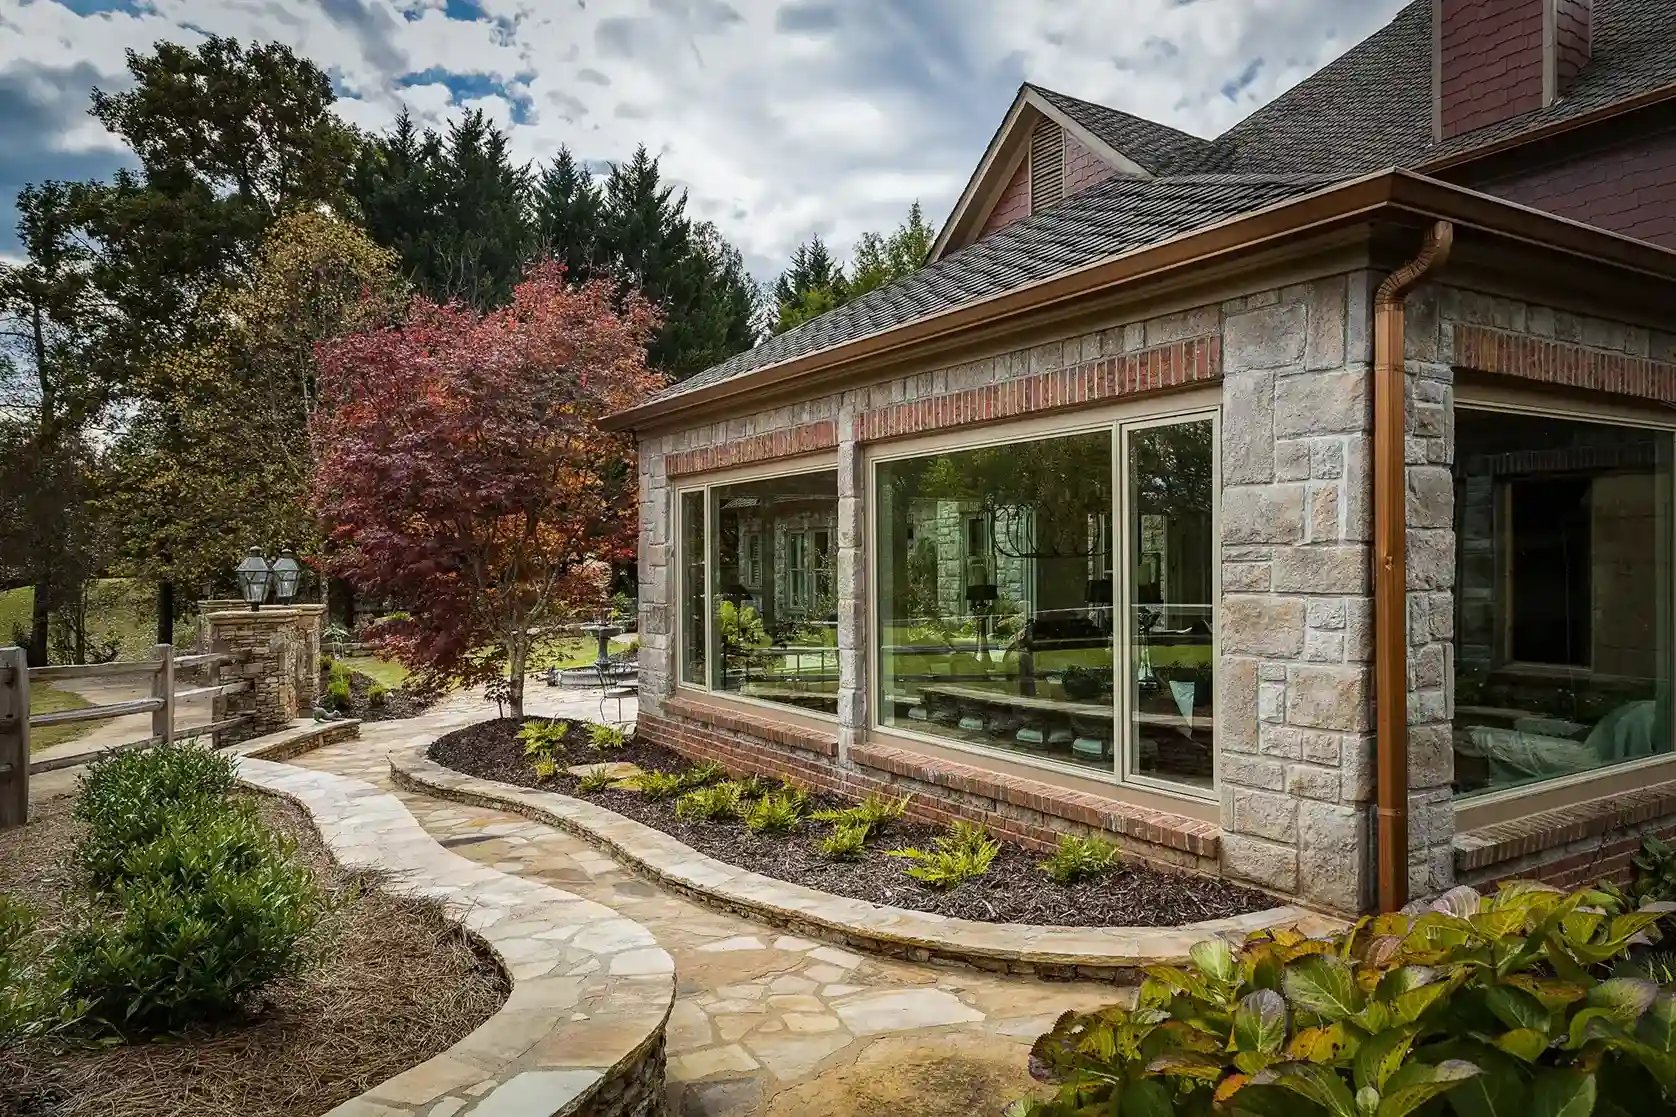 Elegant home exterior with large windows, stone detailing, and landscaped garden path